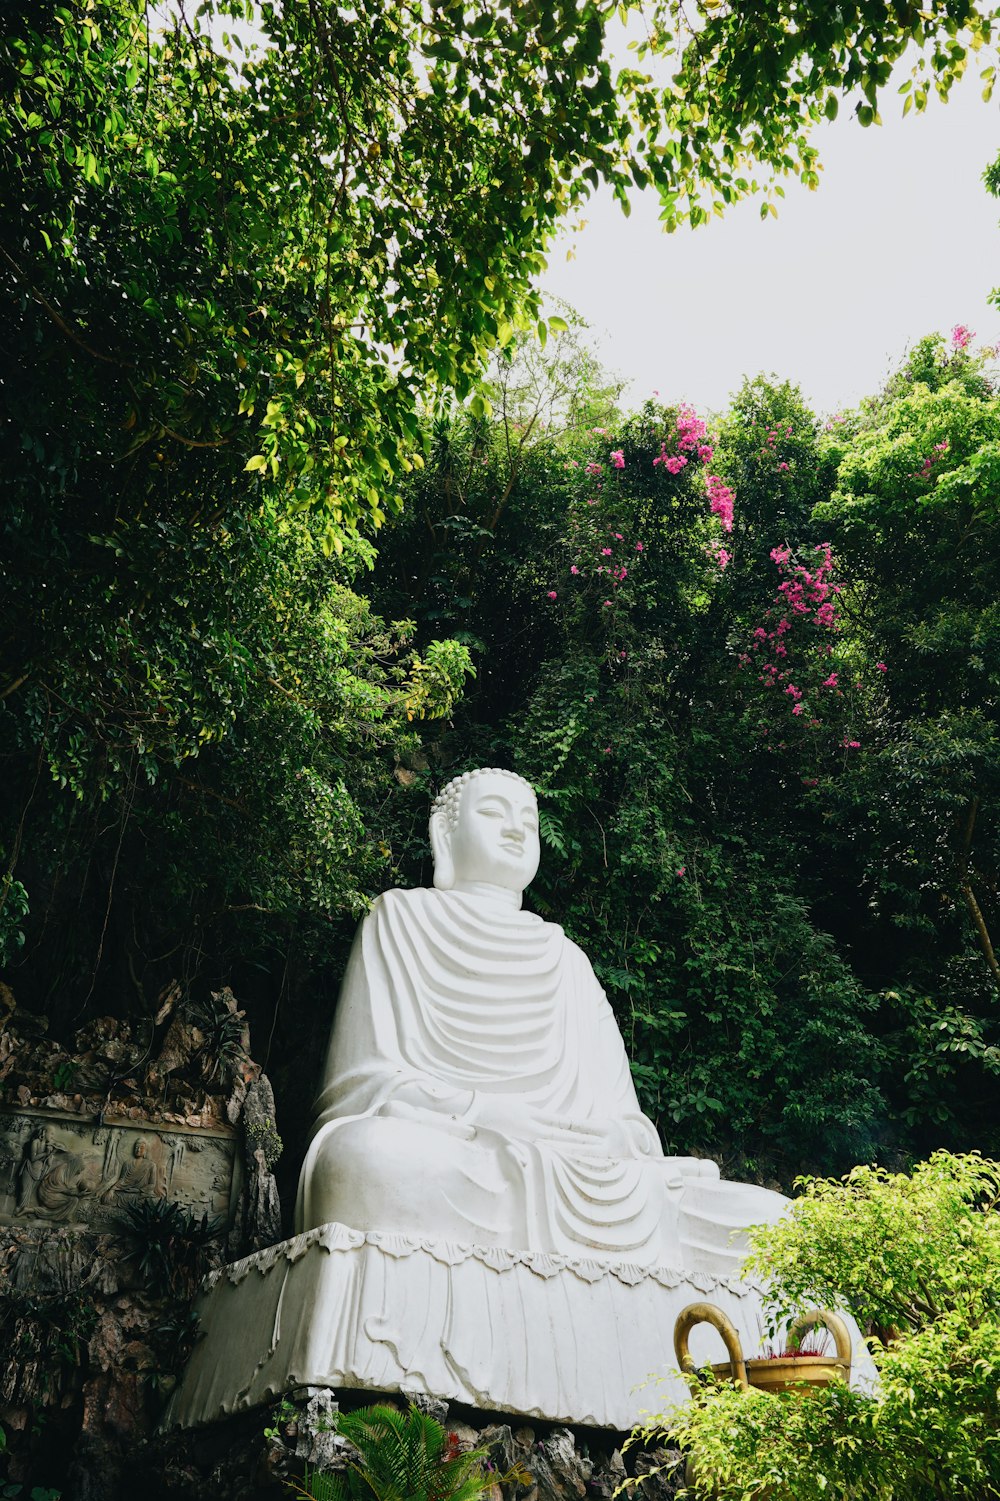 a statue of a person sitting on a bench in a garden